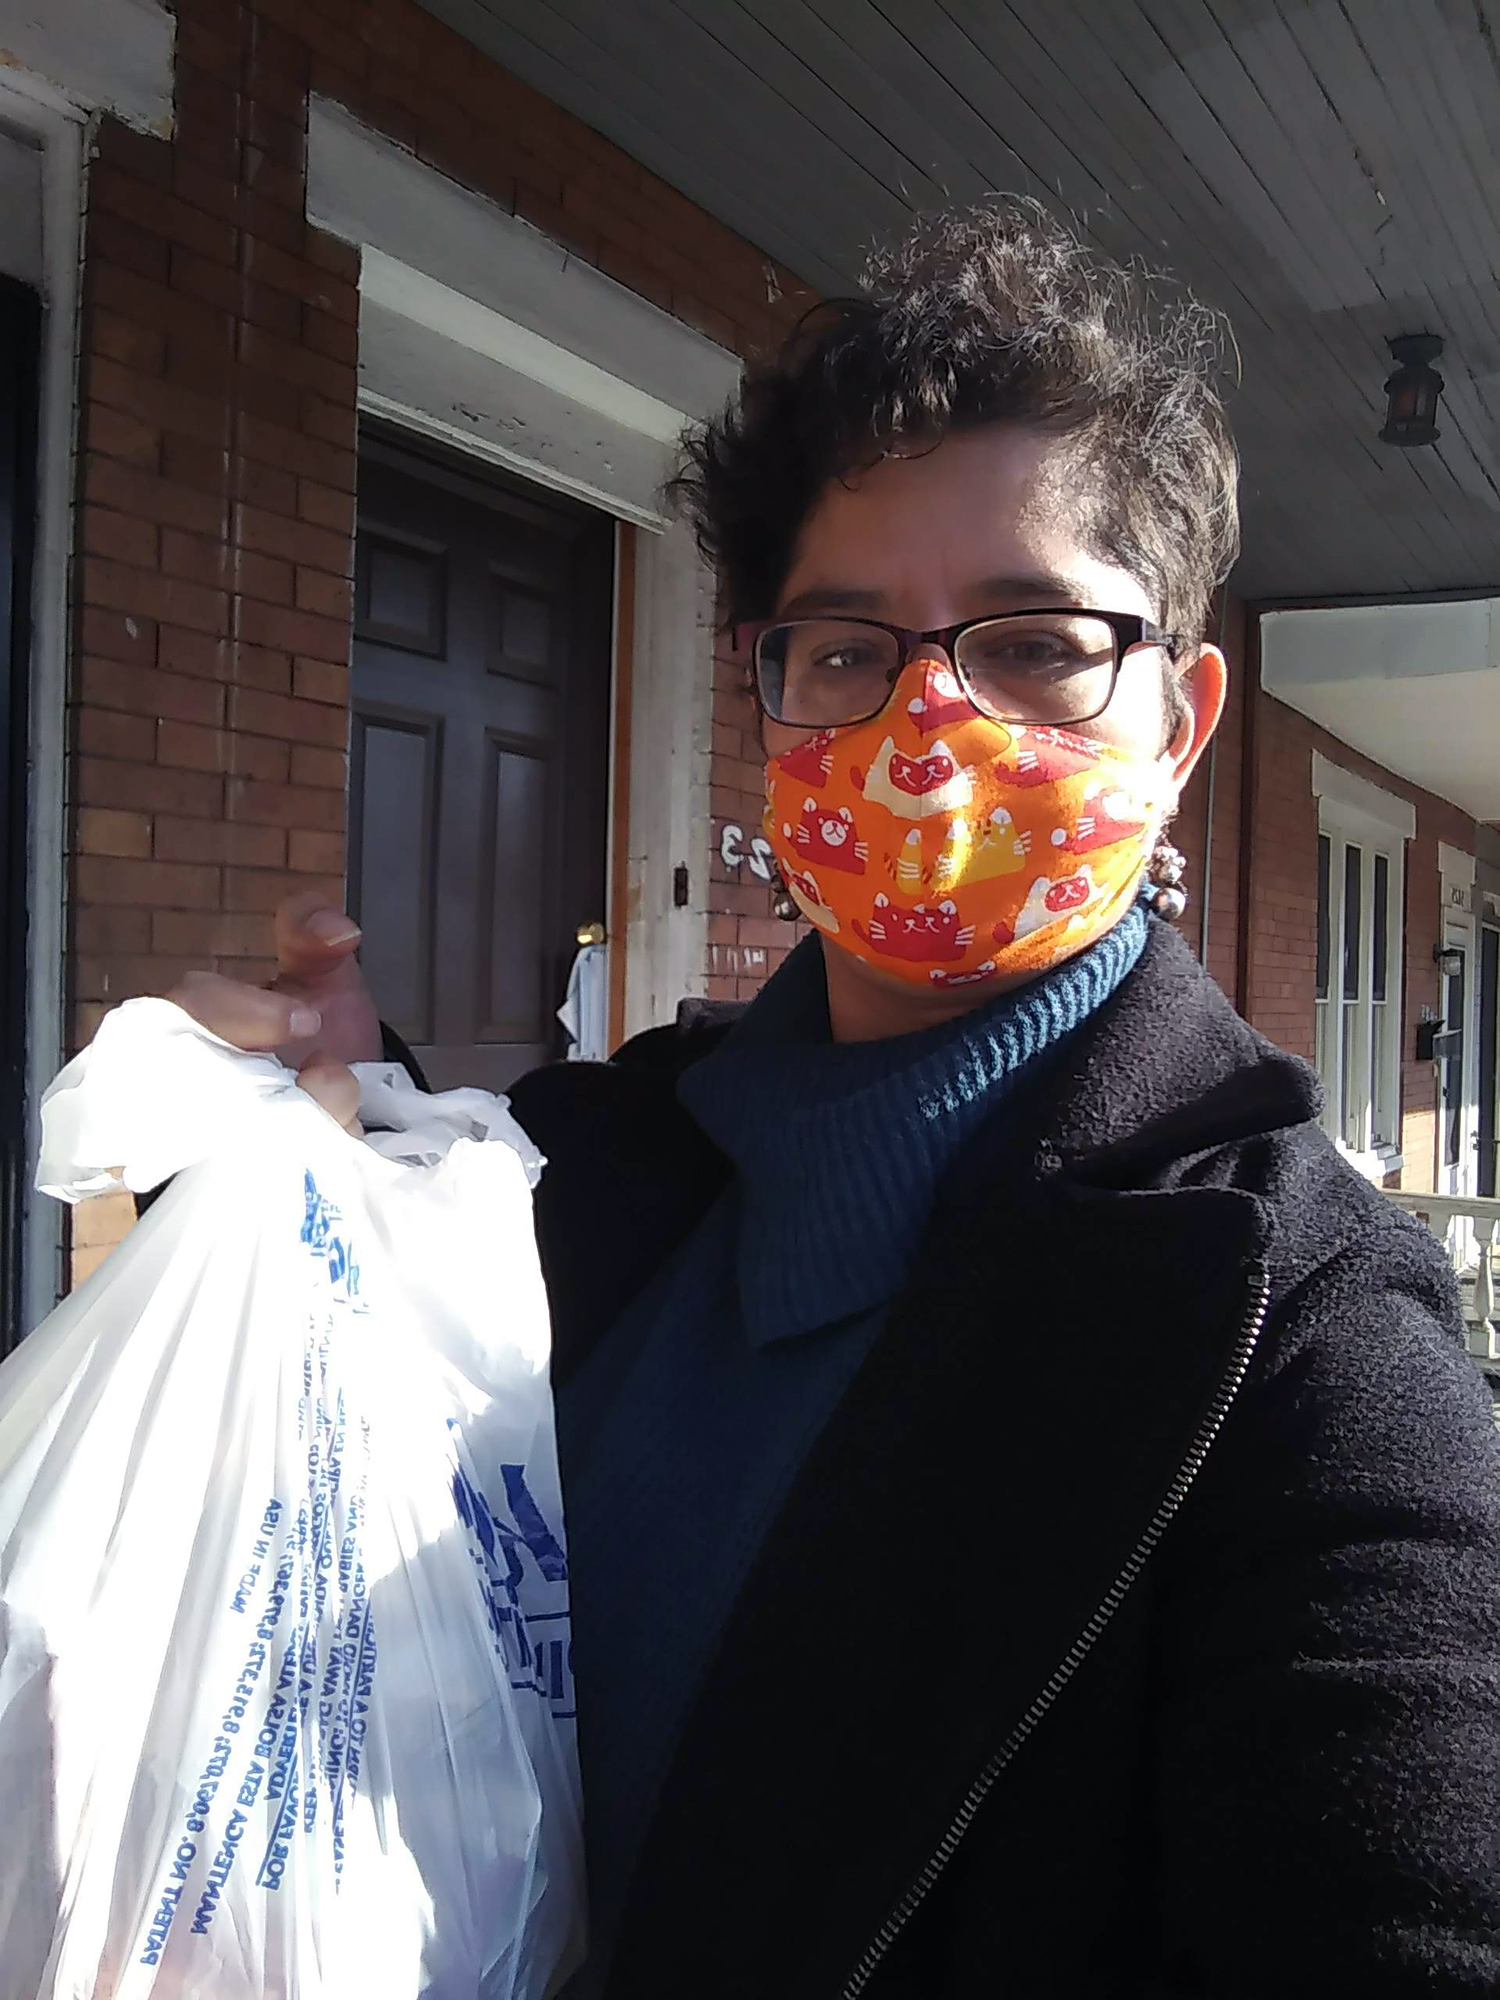 Sarvelia Peralta Duran wears a face mask and holds up a plastic shopping bag of groceries on the front porch of a house in Philadelphia.